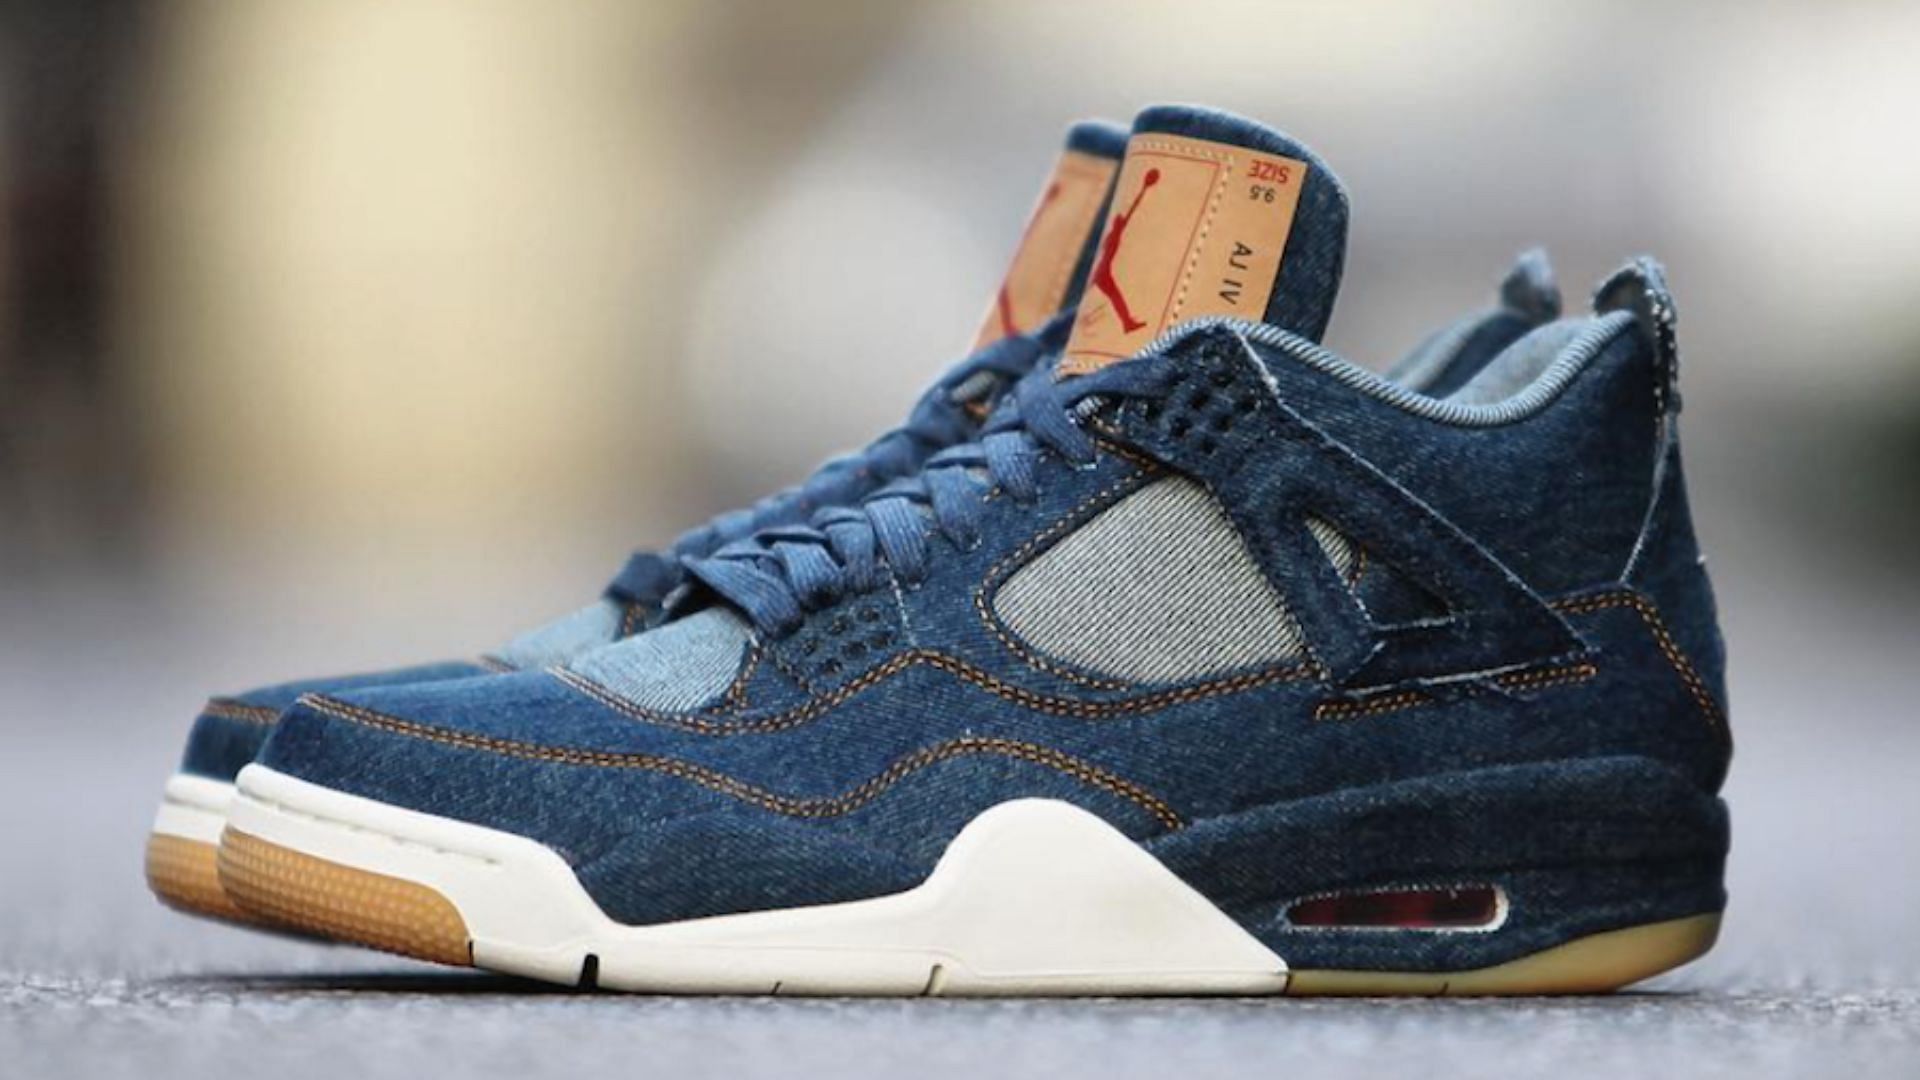 Take a look at the collaborative AJ4 Blue Denim colorway (Image via Twitter/@etspecialcloth)